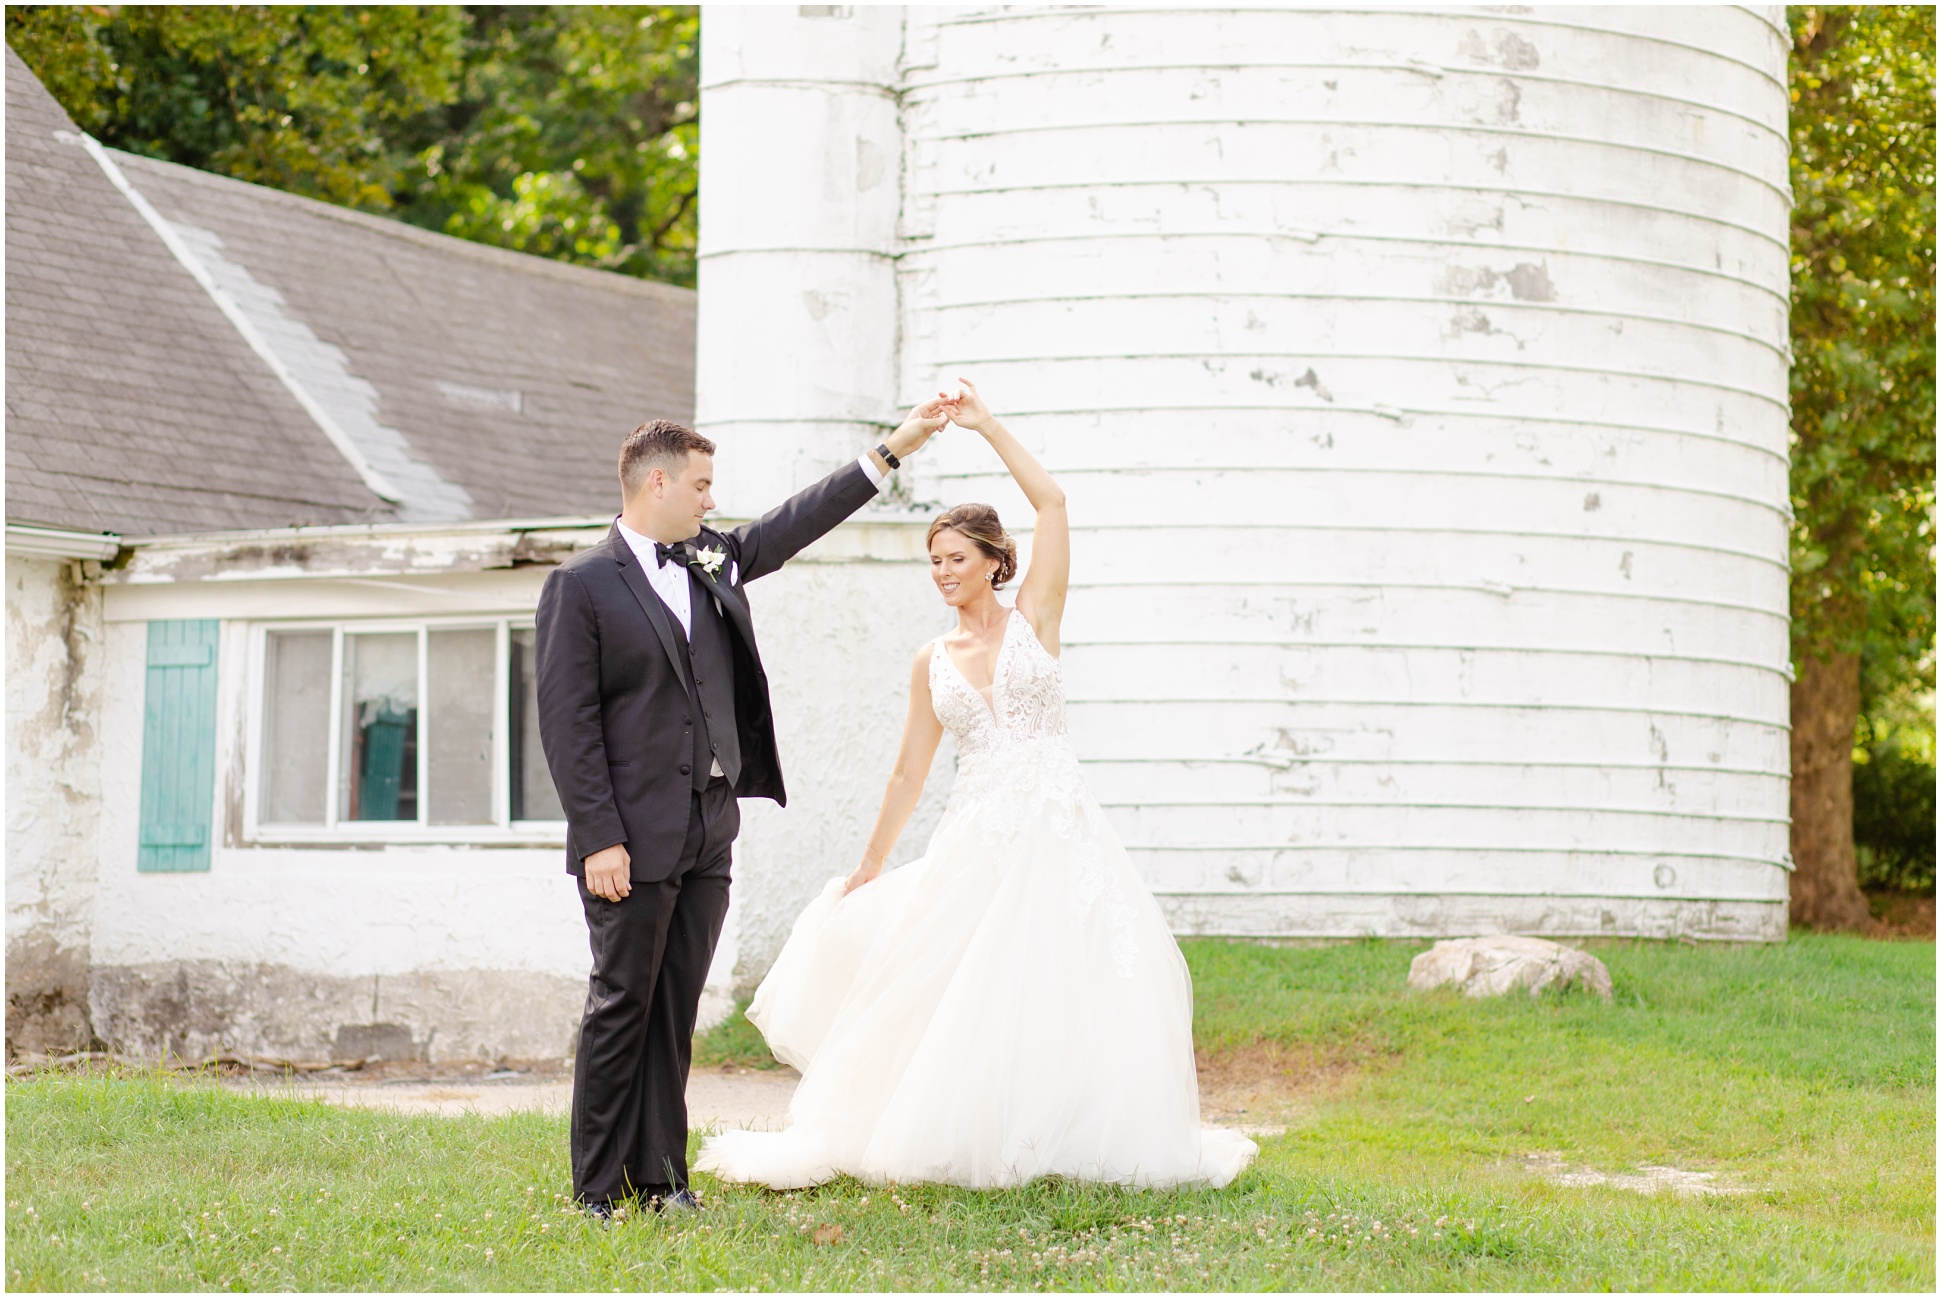 Angela and Jeff twirling next to the silo on Eagles Nest Country Club golf course